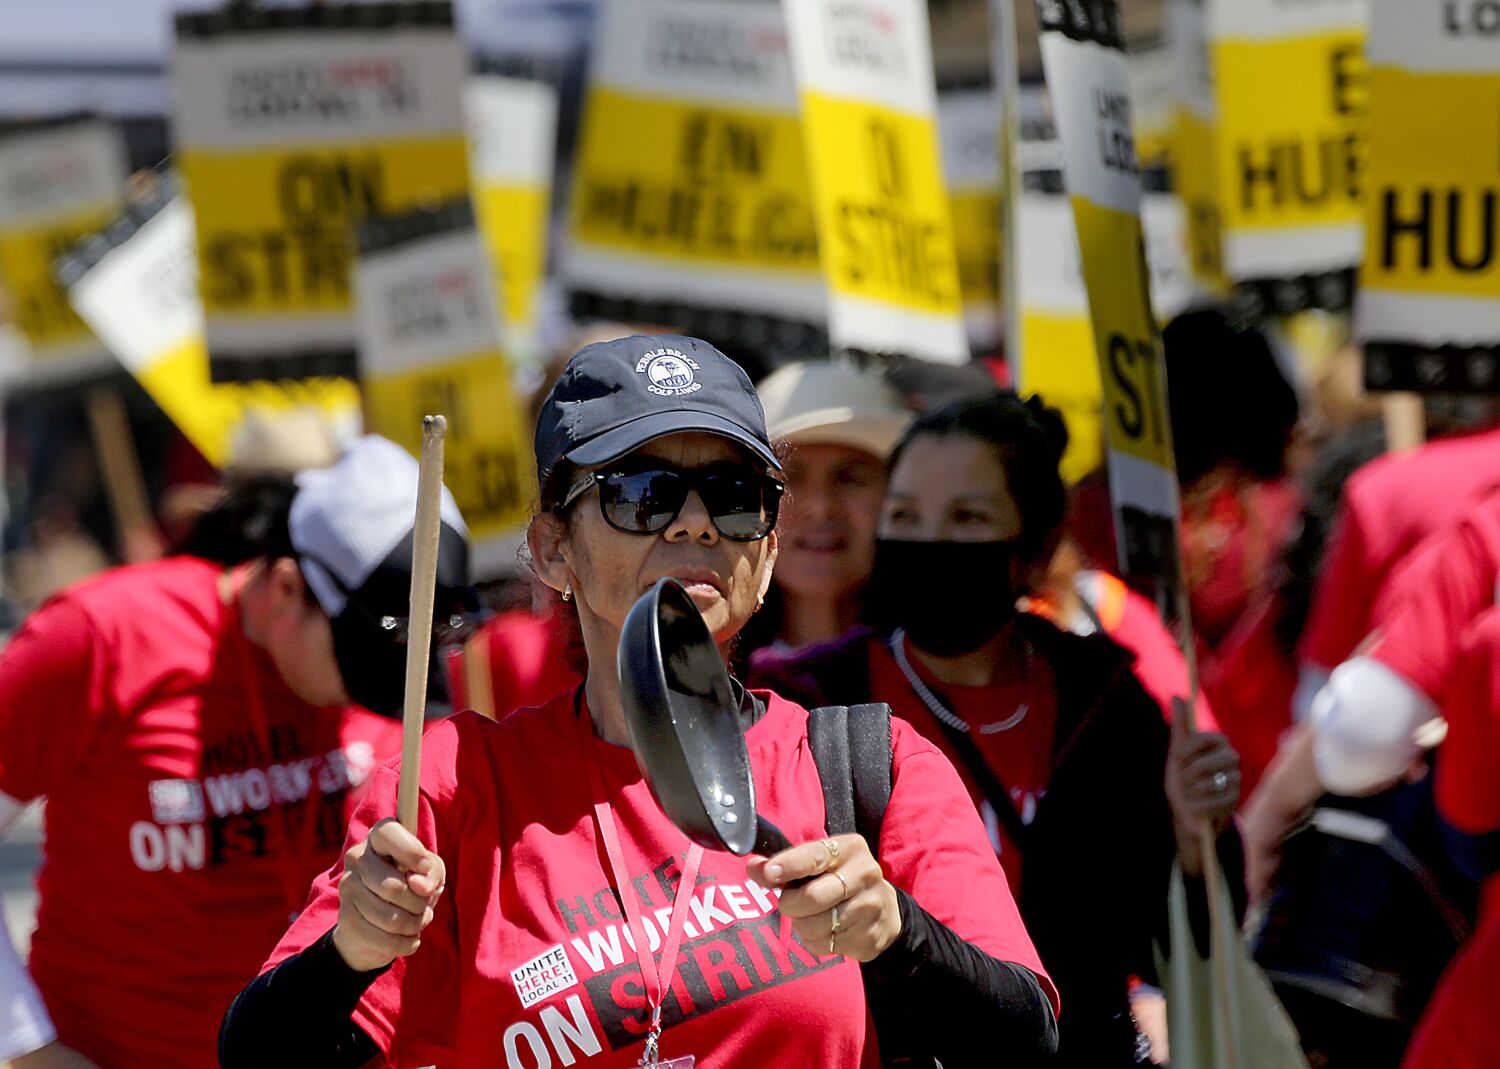 Worker strikes hit more hotels, this time near Disneyland